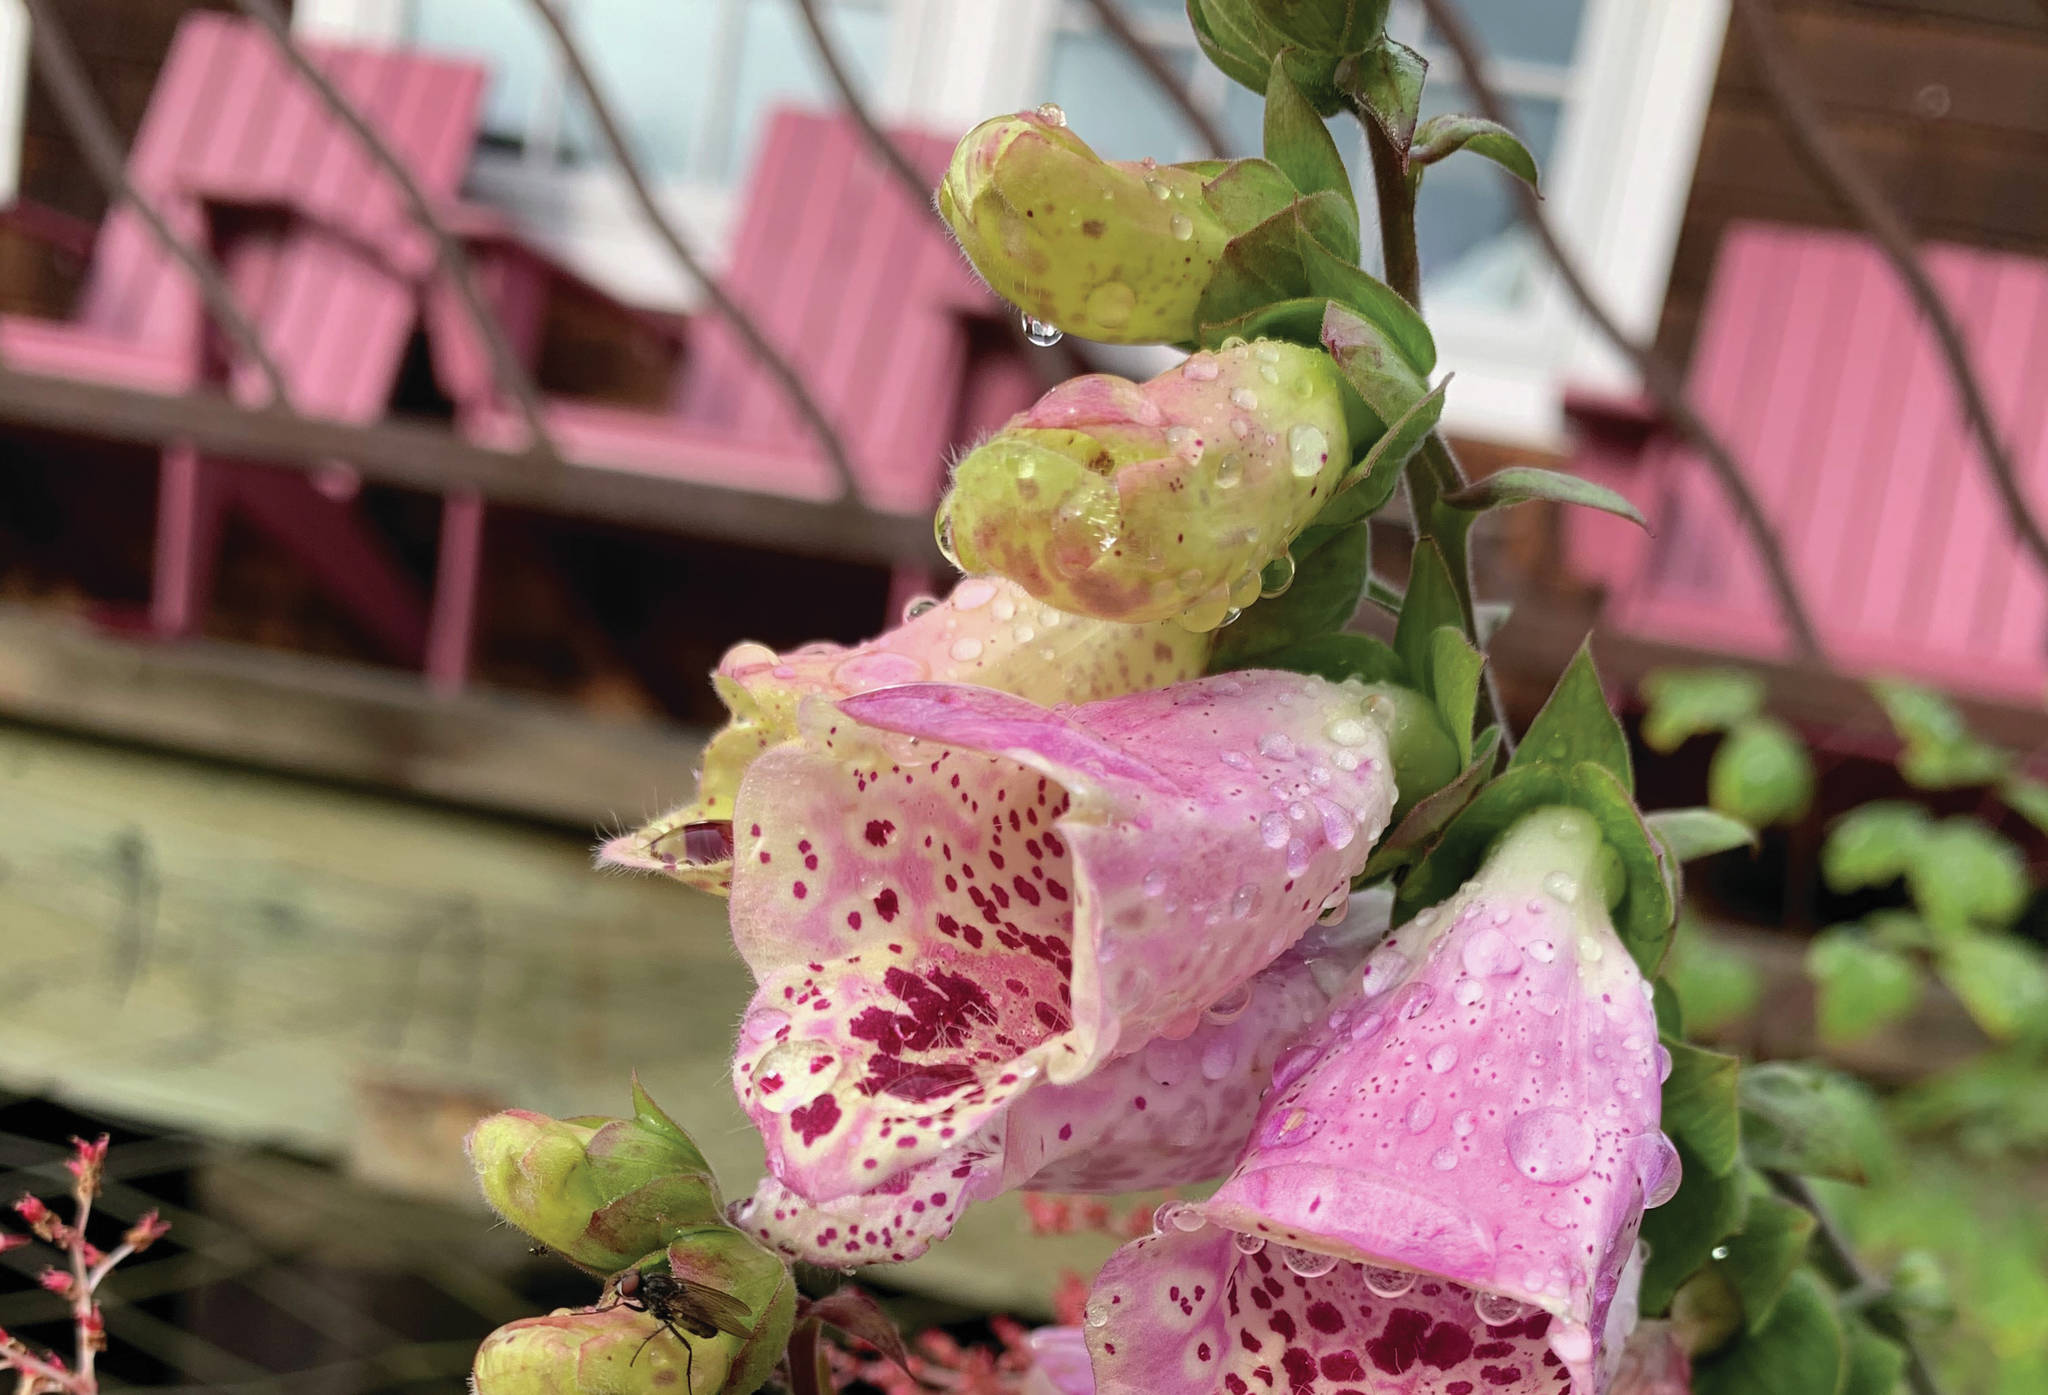 Foxgloves and snapdragons offering much needed color to the fall garden as seen here on Oct. 9, 2020, in the Kachemak Gardener's garden in Homer, Alaska. (Photo by Rosemary Fitzpatrick)